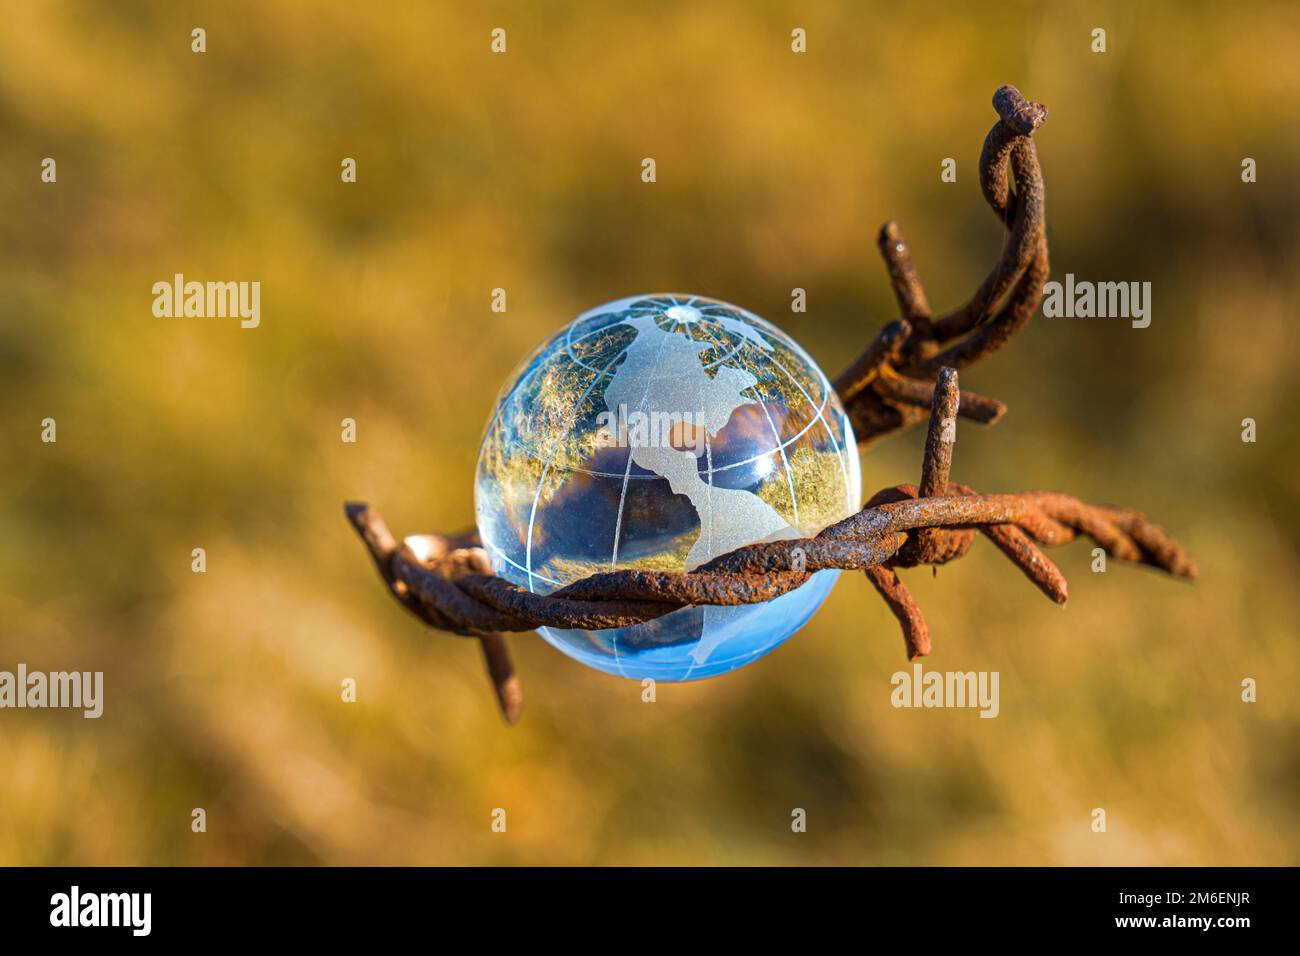 The concept of symbolism. On a yelloe grass is a glass globe, which is surrounded by rusty barbed wire Stock Photo